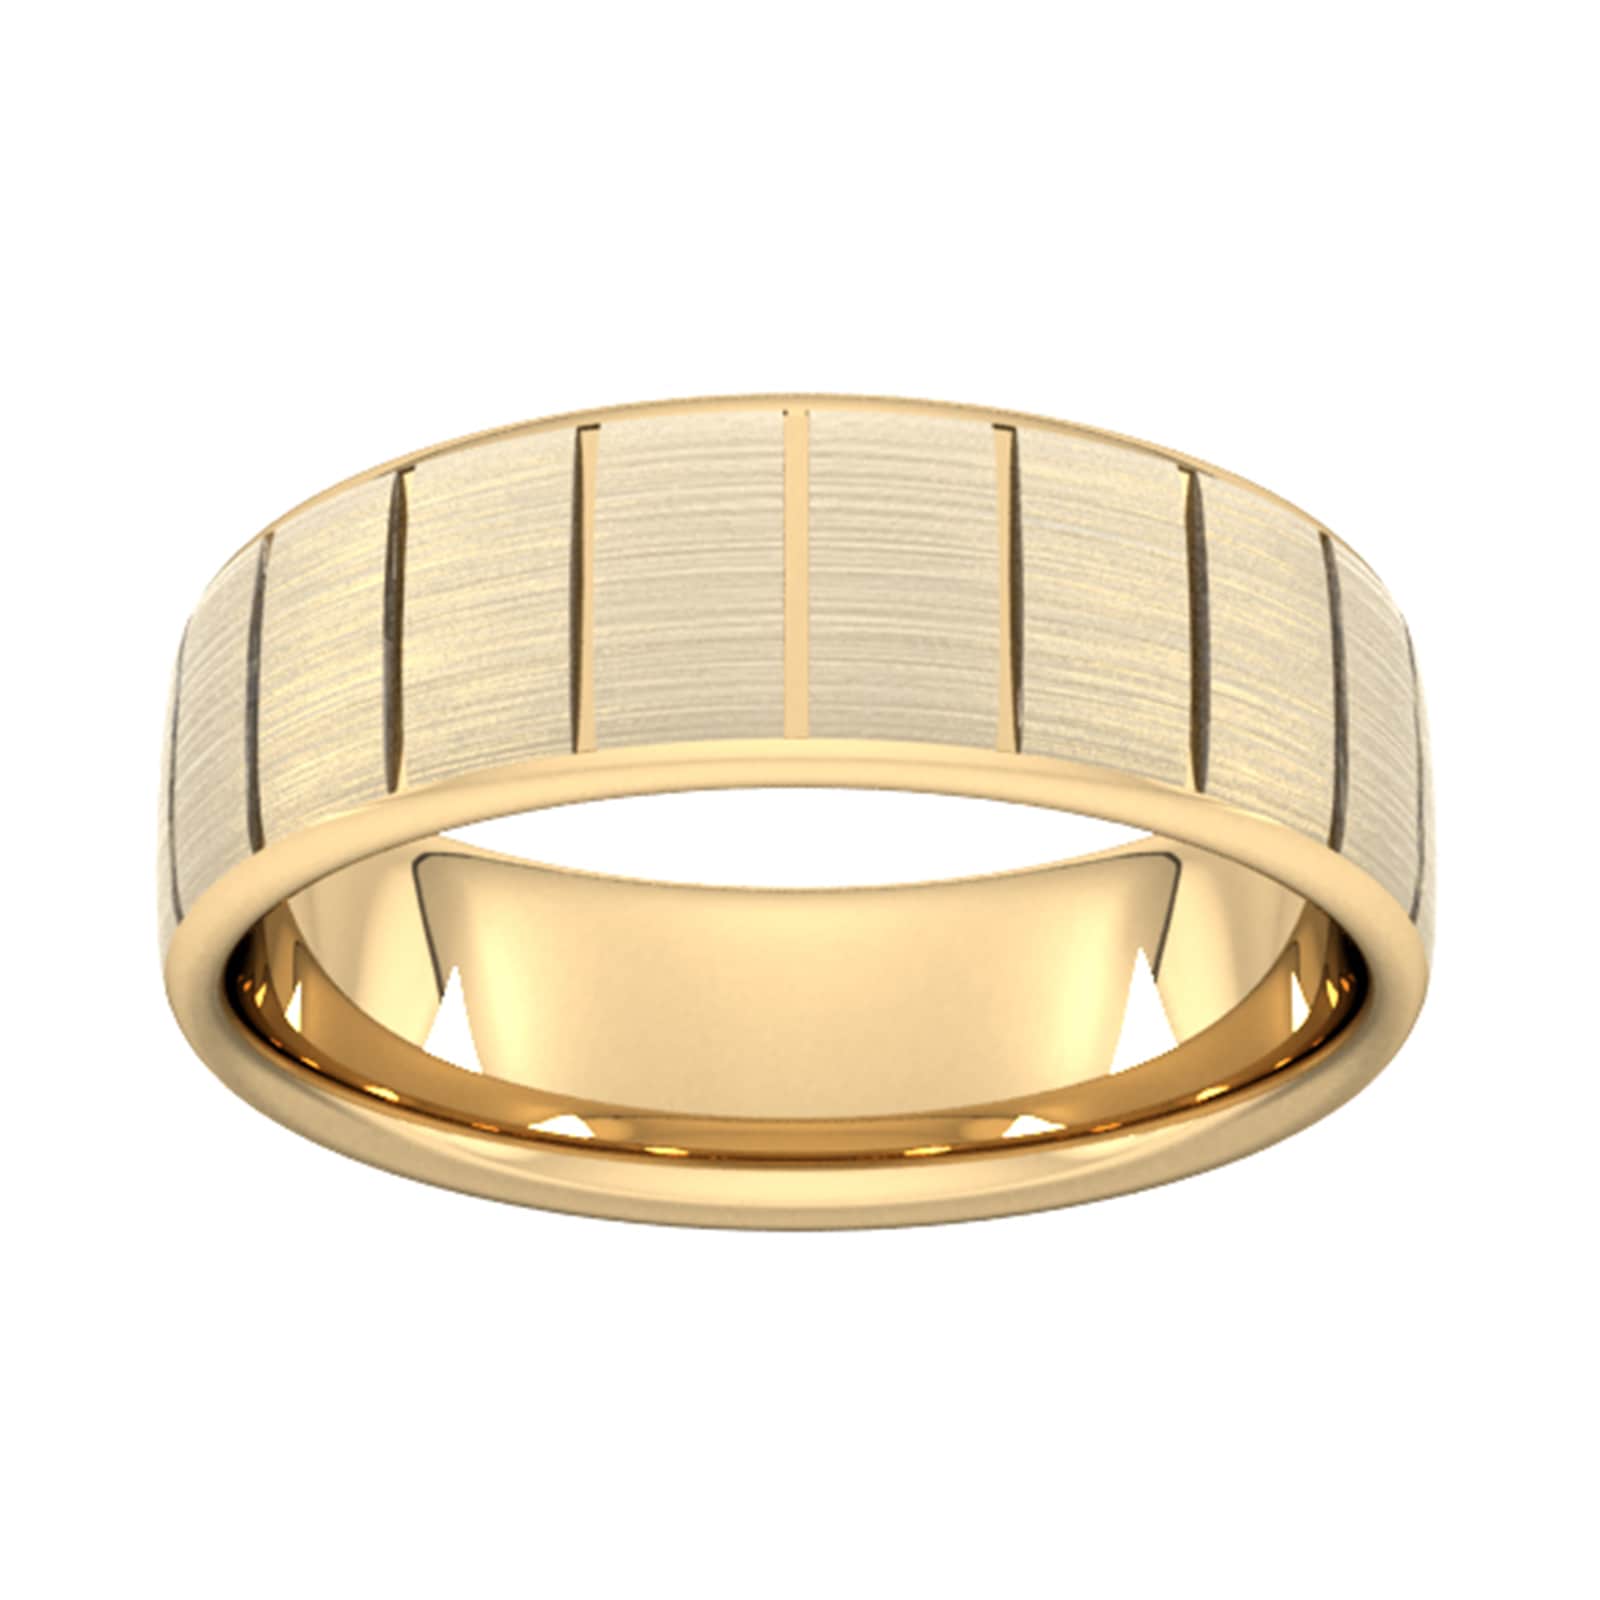 7mm D Shape Standard Vertical Lines Wedding Ring In 18 Carat Yellow Gold - Ring Size N